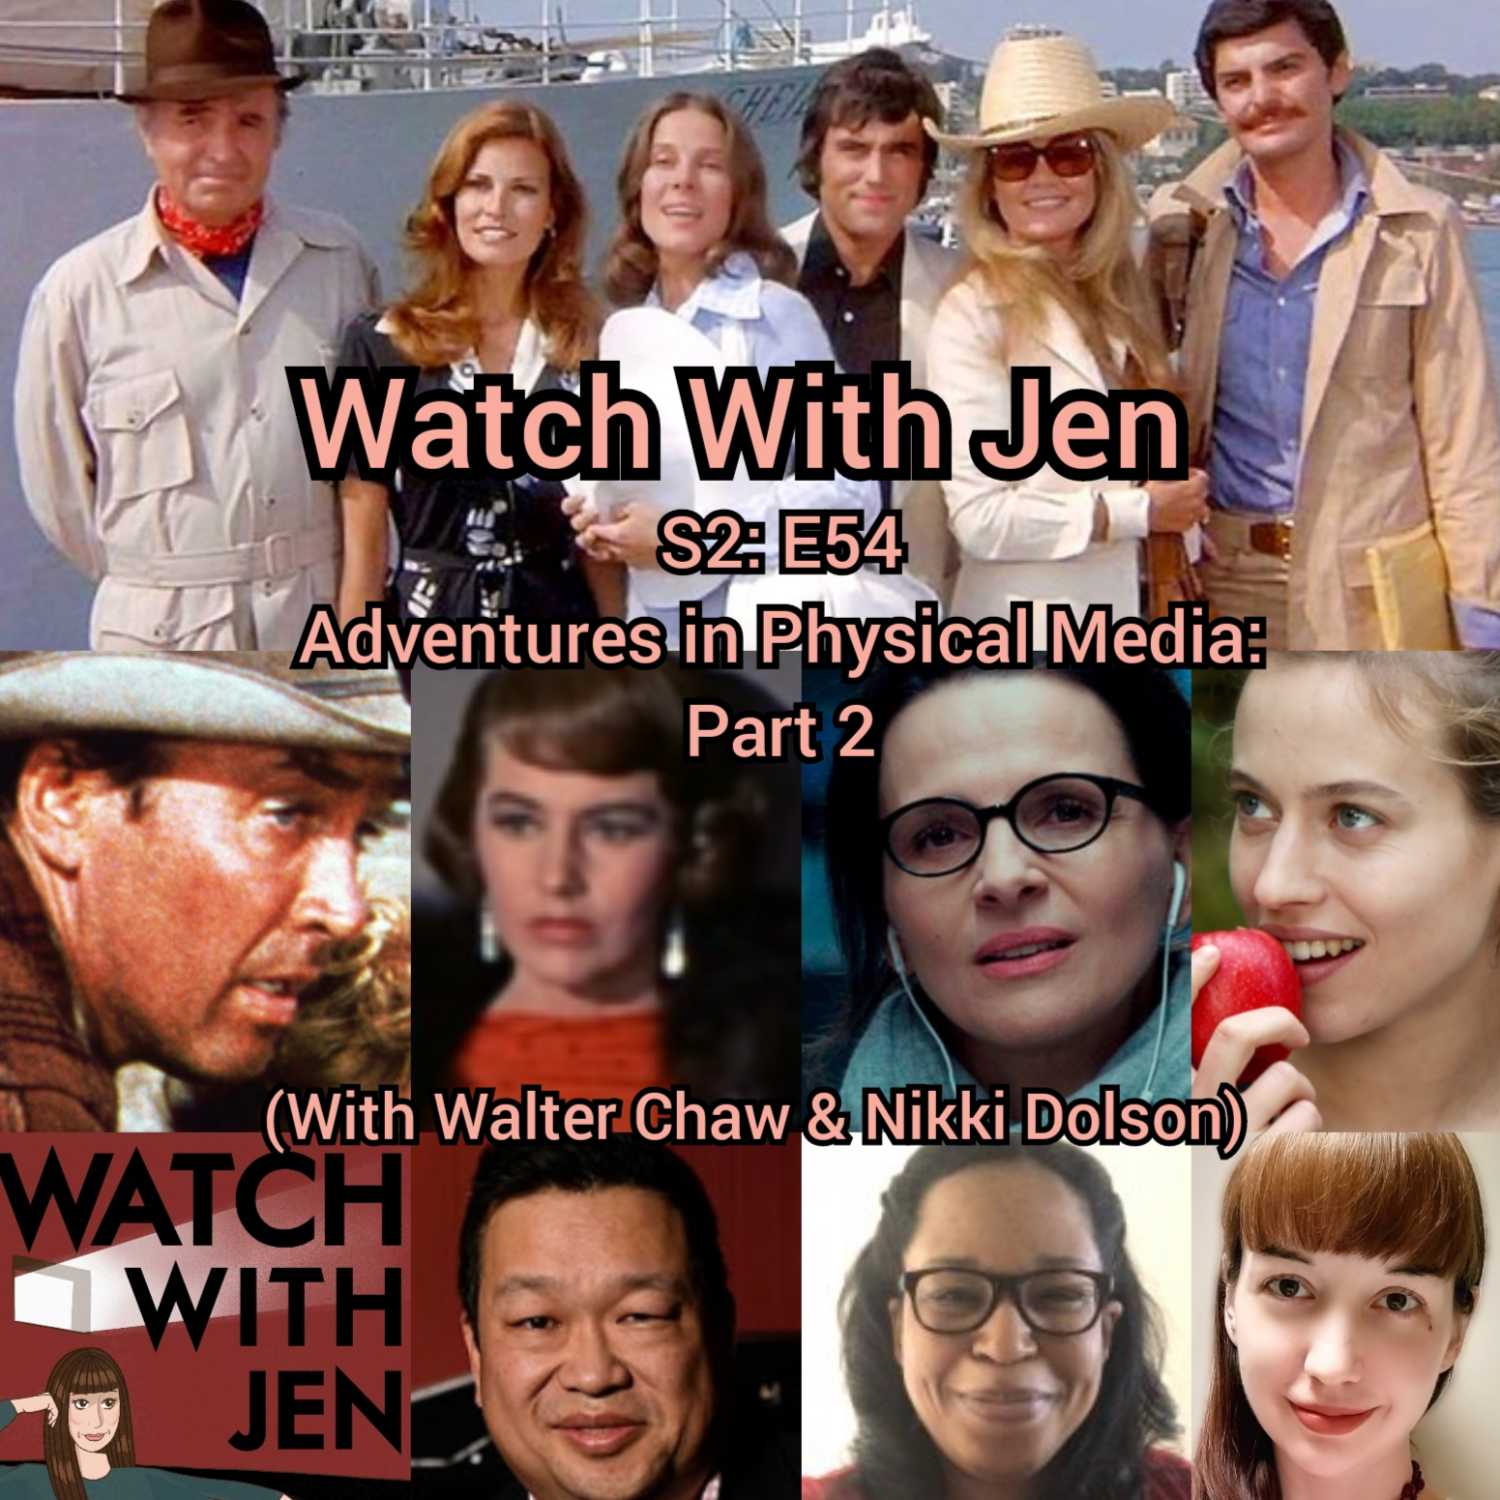 Watch With Jen - S2: E54 - Adventures in Physical Media: Part 2 (With Walter Chaw & Nikki Dolson)